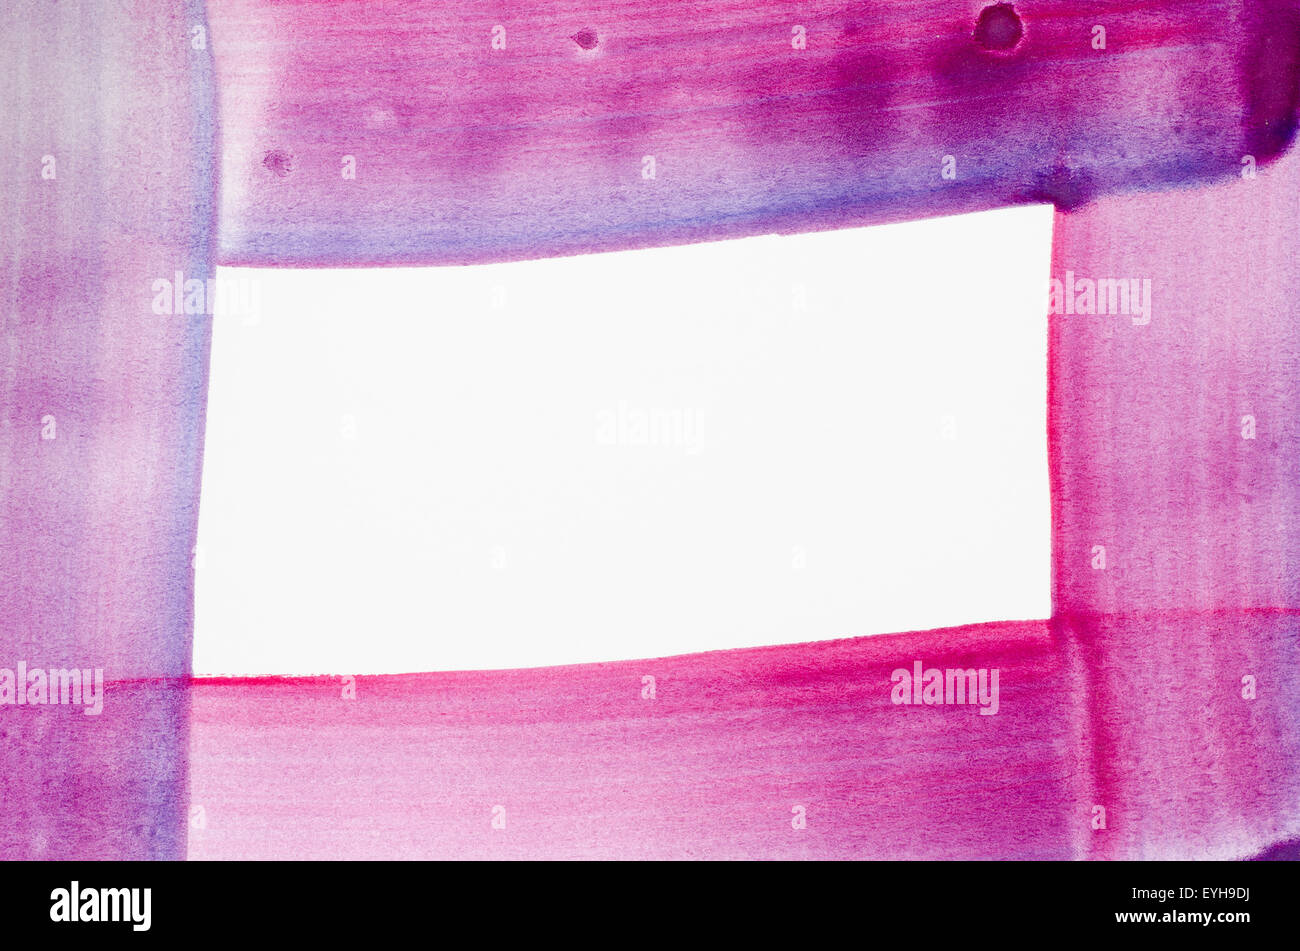 violet watercolor painted texture on white background paper Stock Photo